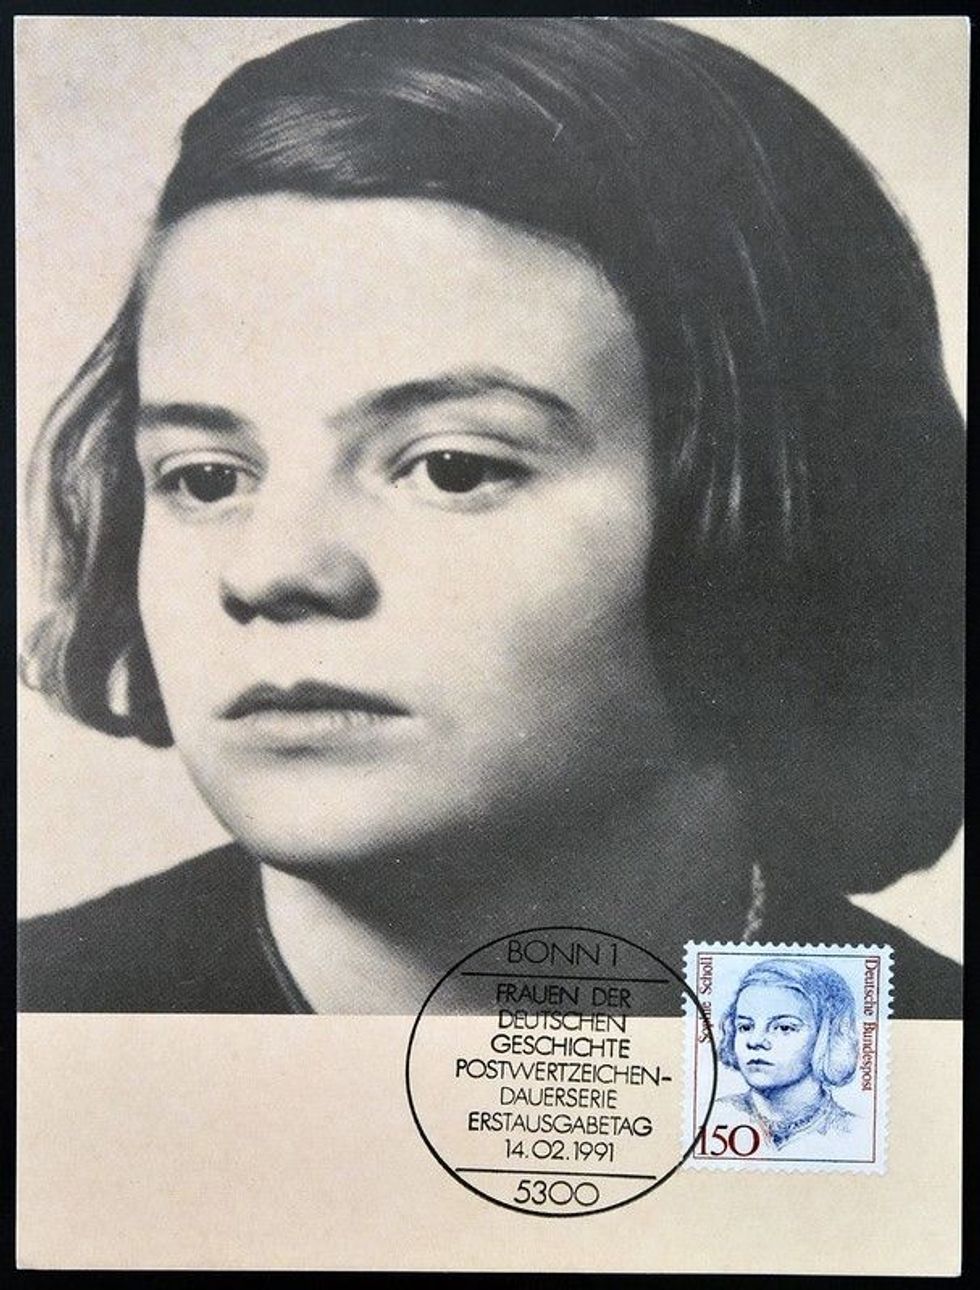 The greatest anti-nazi icon Sophie School is a member of the white rose movement)